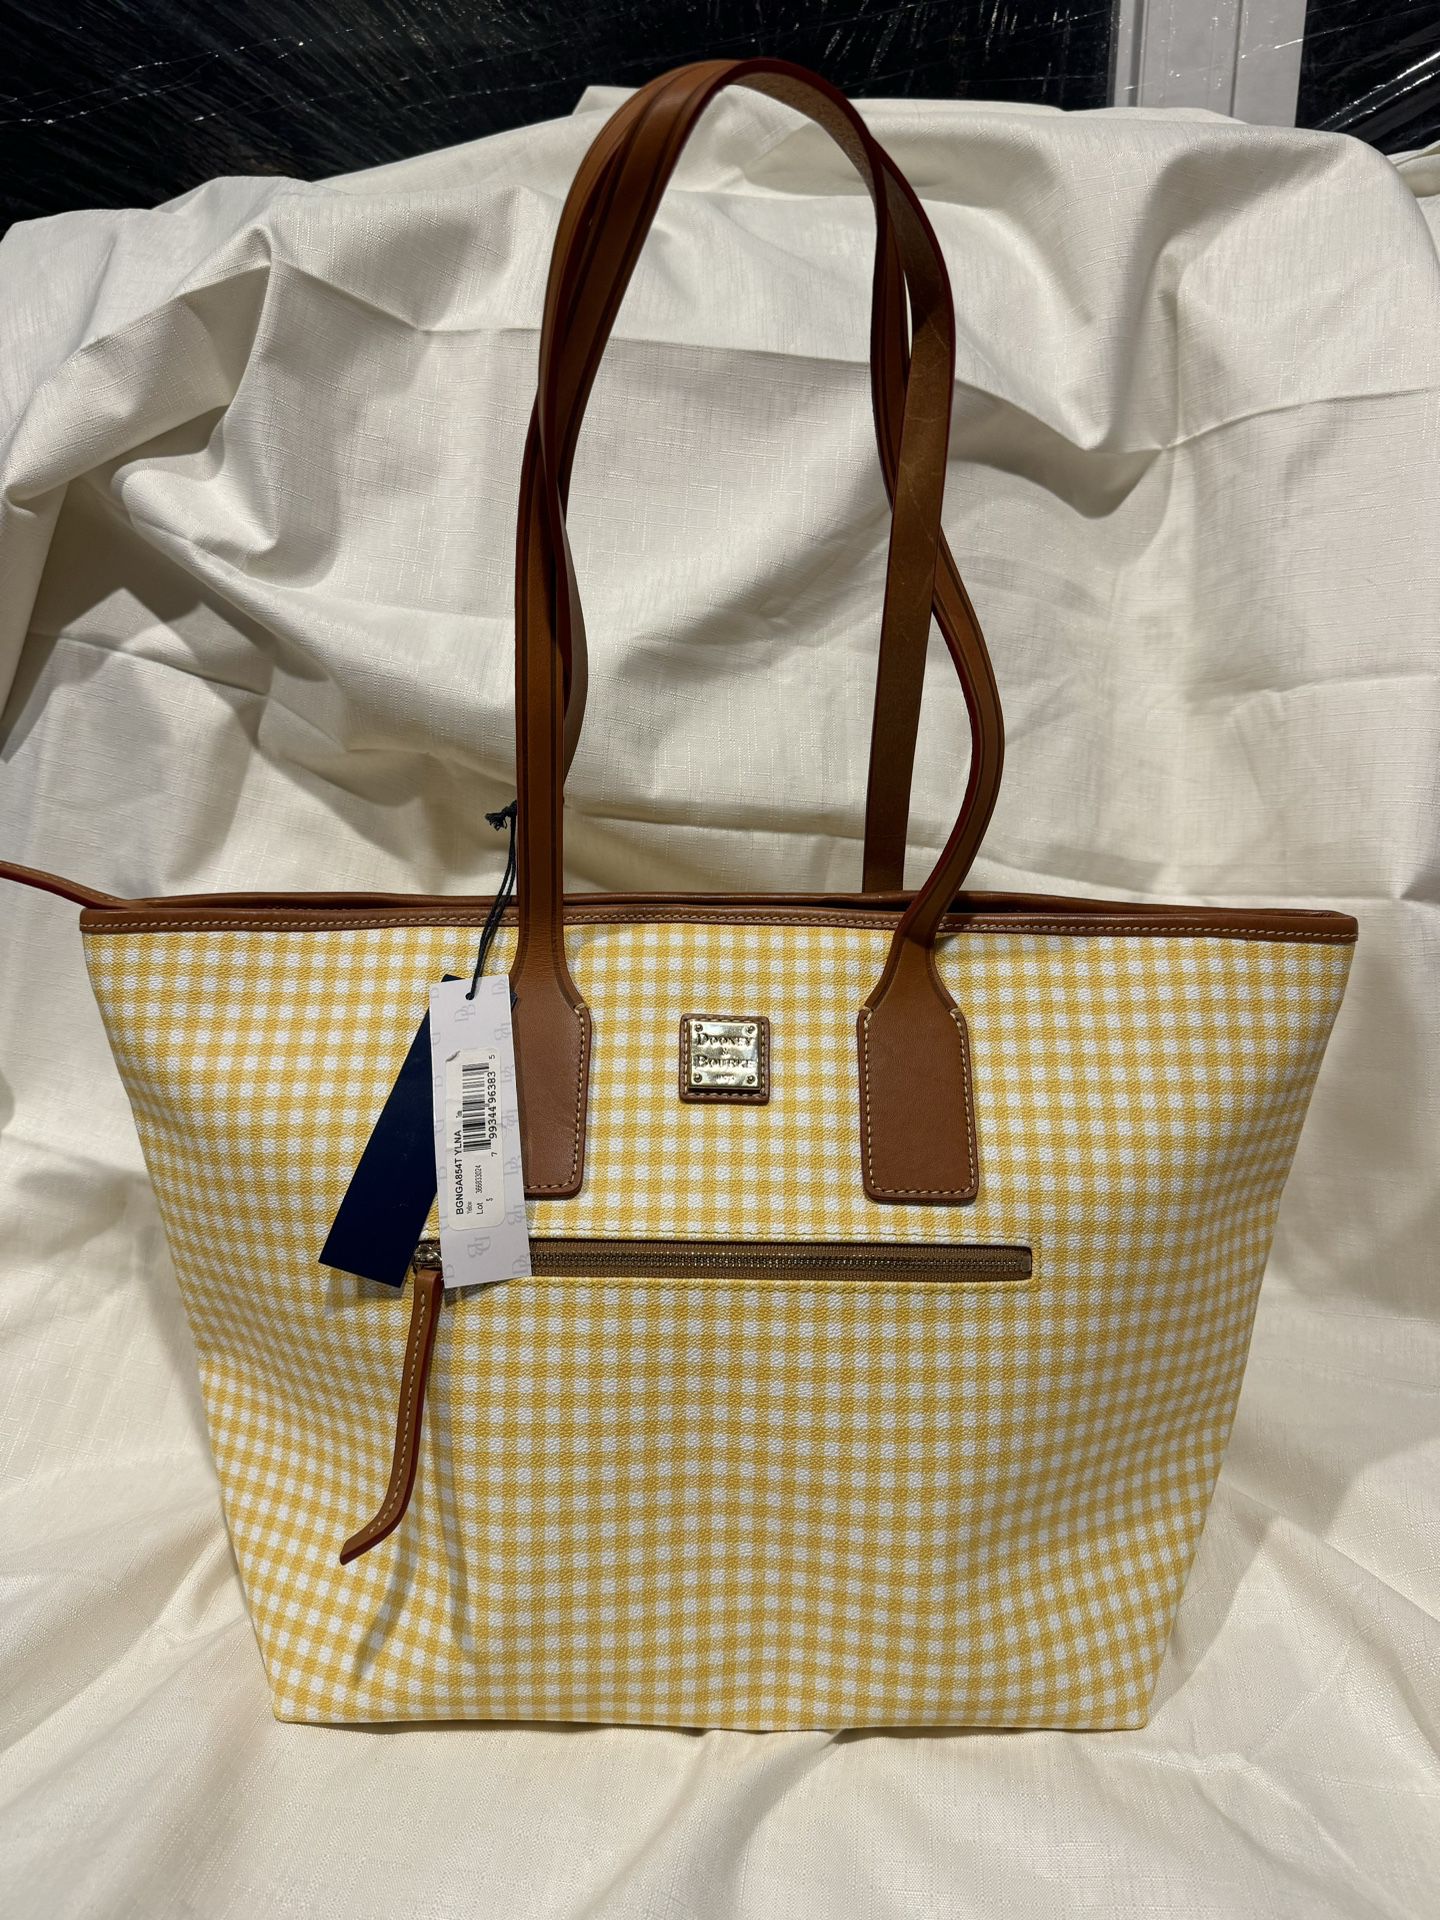 NWT Dooney Bourke Gingham Checked Large Shopper Tote Bag YELLOW